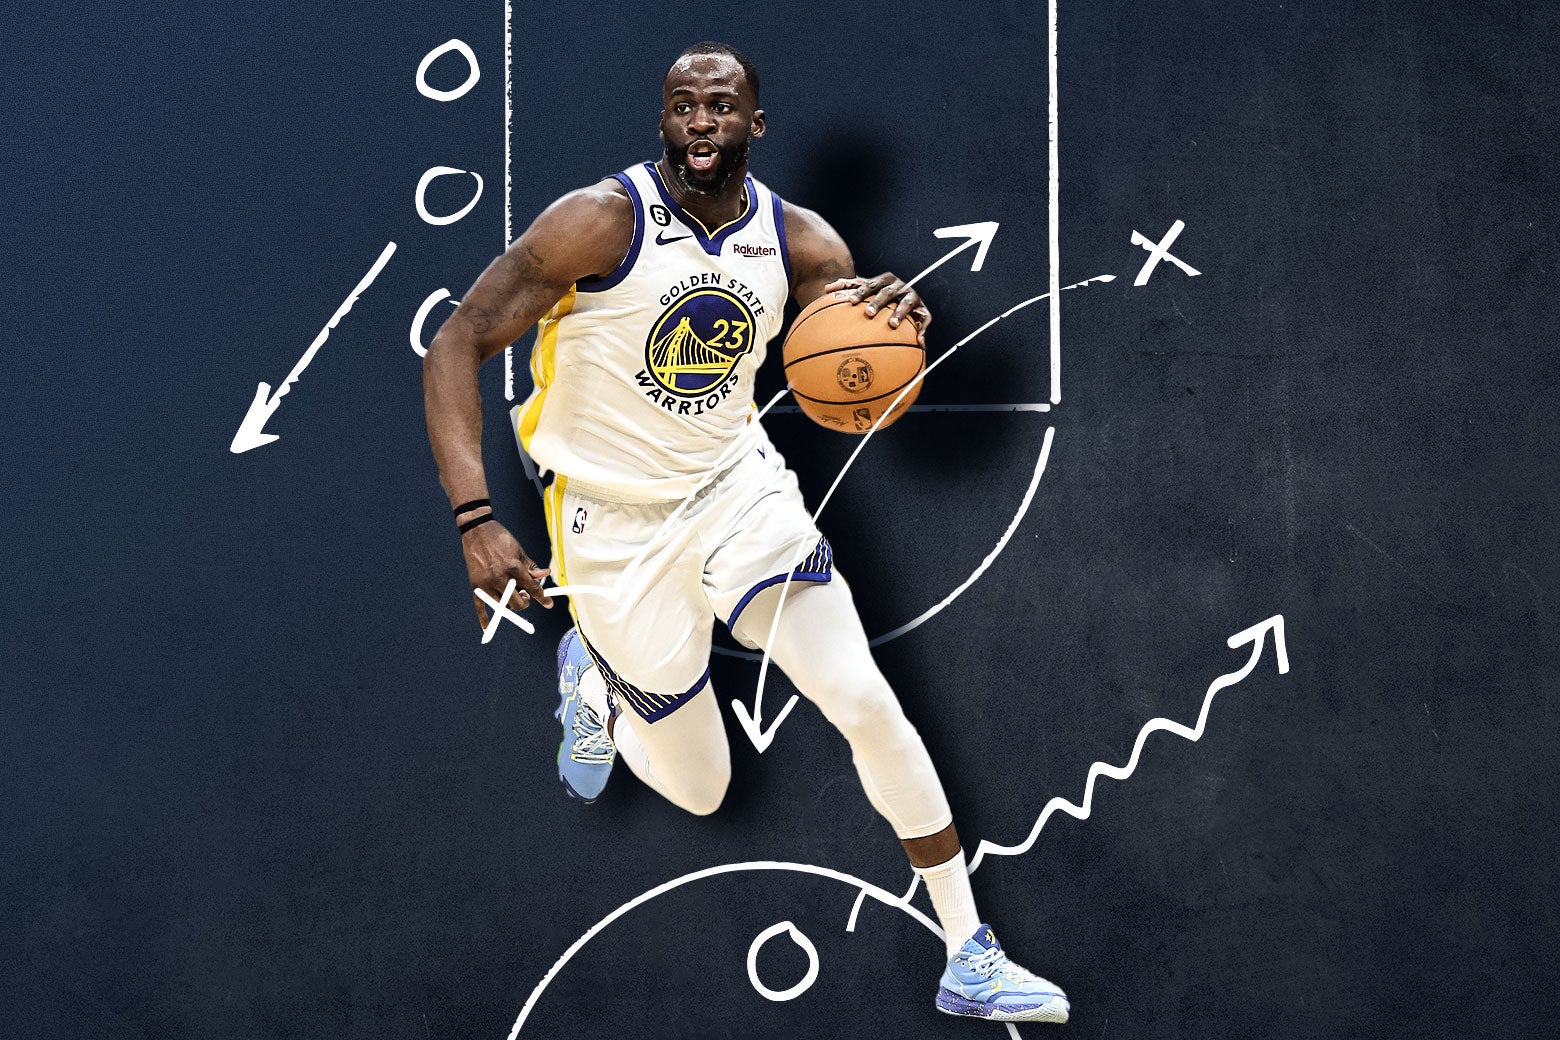 Draymond dribbles with an illustrated Xes-and-Os play on a basketball half-court behind him.